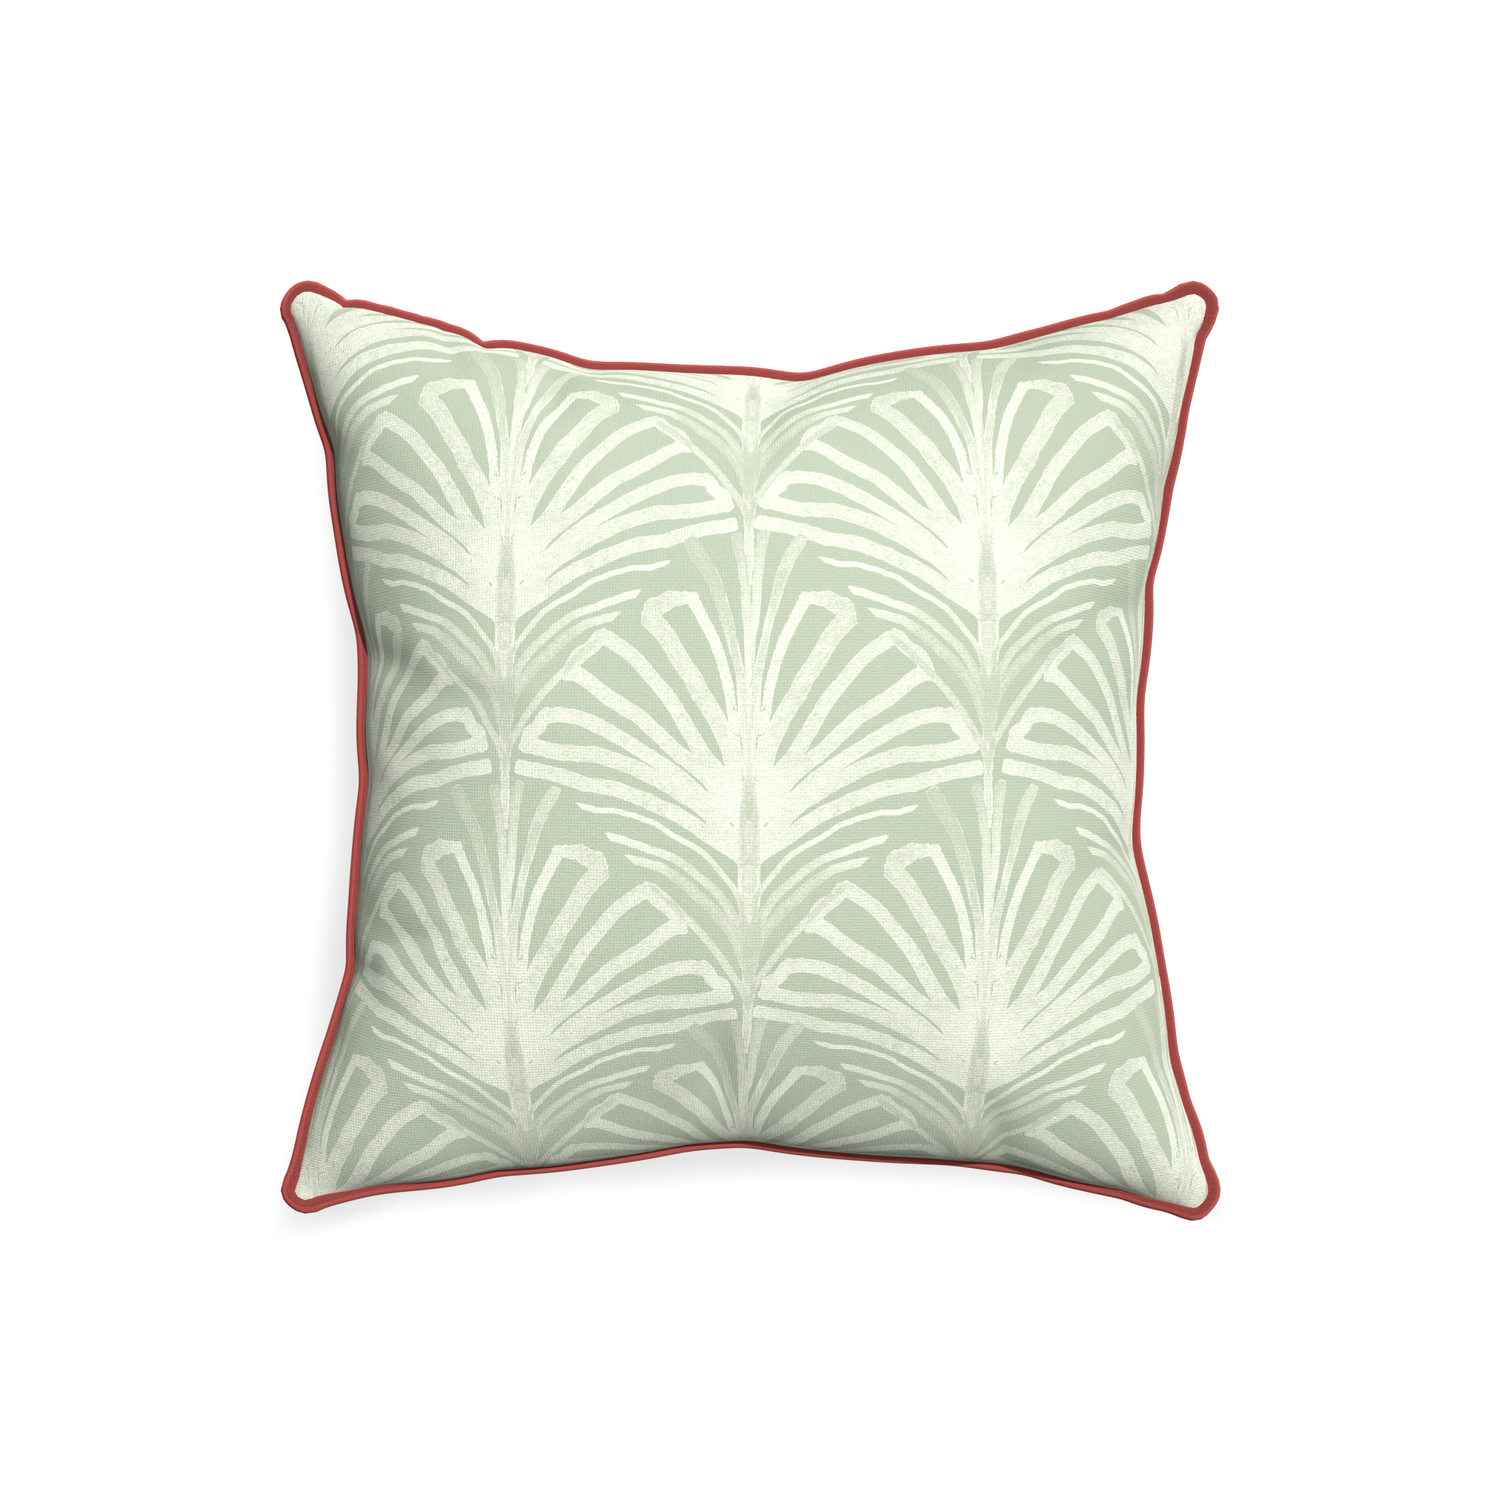 20-square suzy sage custom pillow with c piping on white background